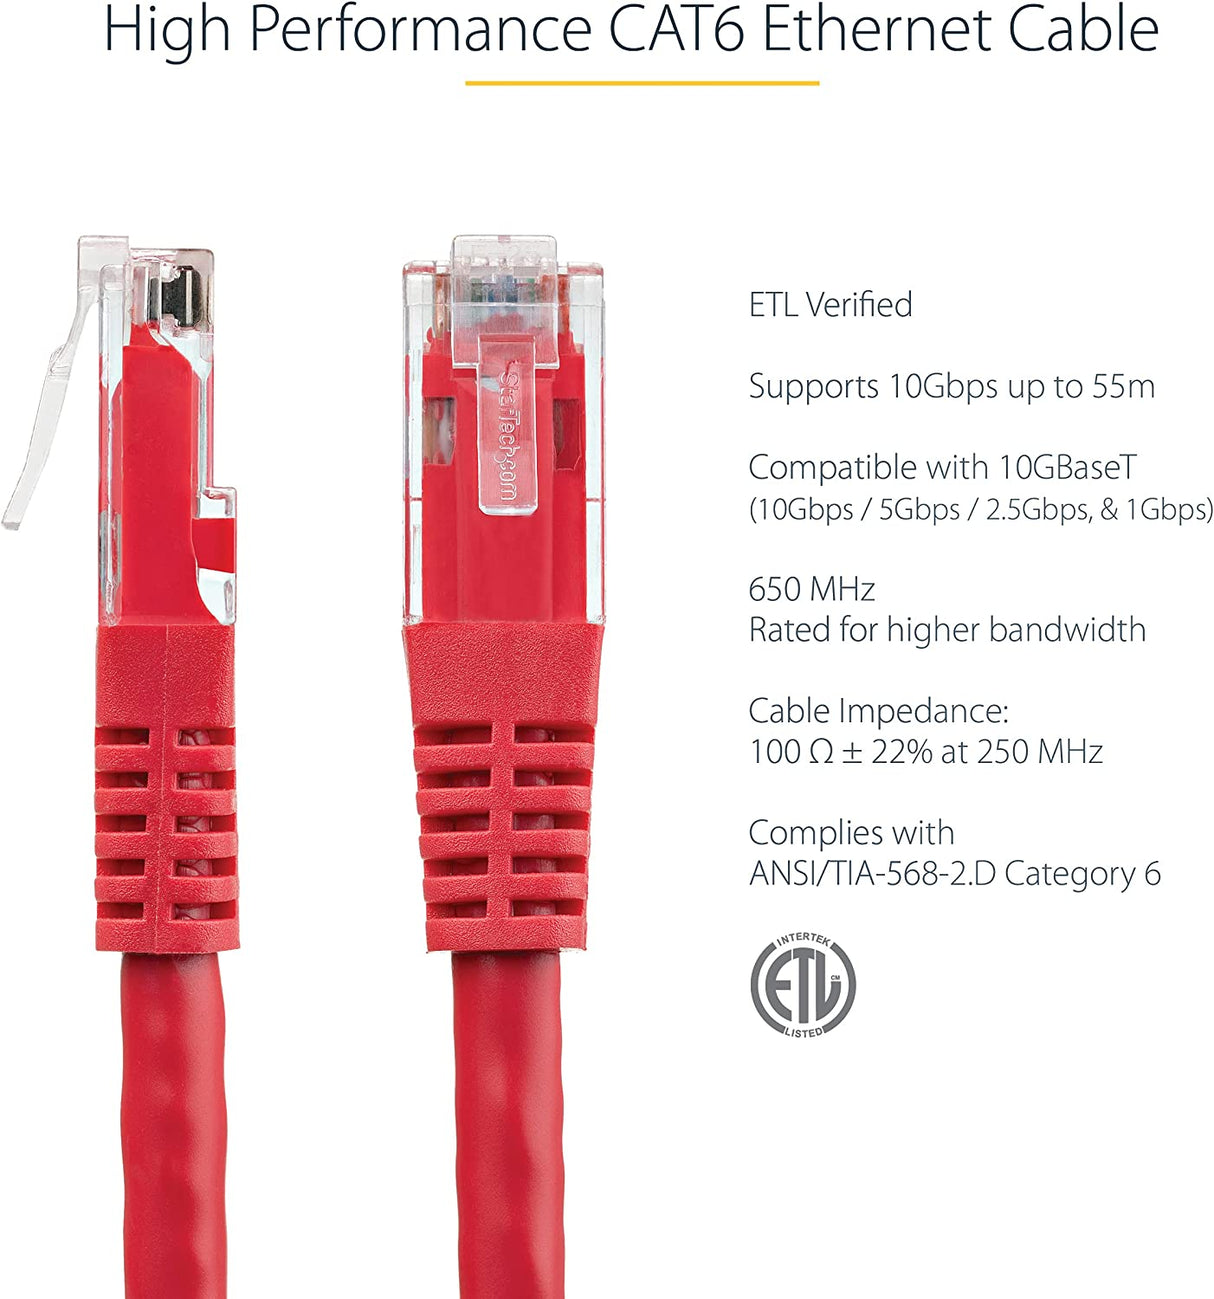 StarTech.com 100ft CAT6 Ethernet Cable - Red CAT 6 Gigabit Ethernet Wire -650MHz 100W PoE++ RJ45 UTP Molded Category 6 Network/Patch Cord w/Strain Relief/Fluke Tested UL/TIA Certified (C6PATCH100RD) Red 100 ft / 30 m 1 Pack